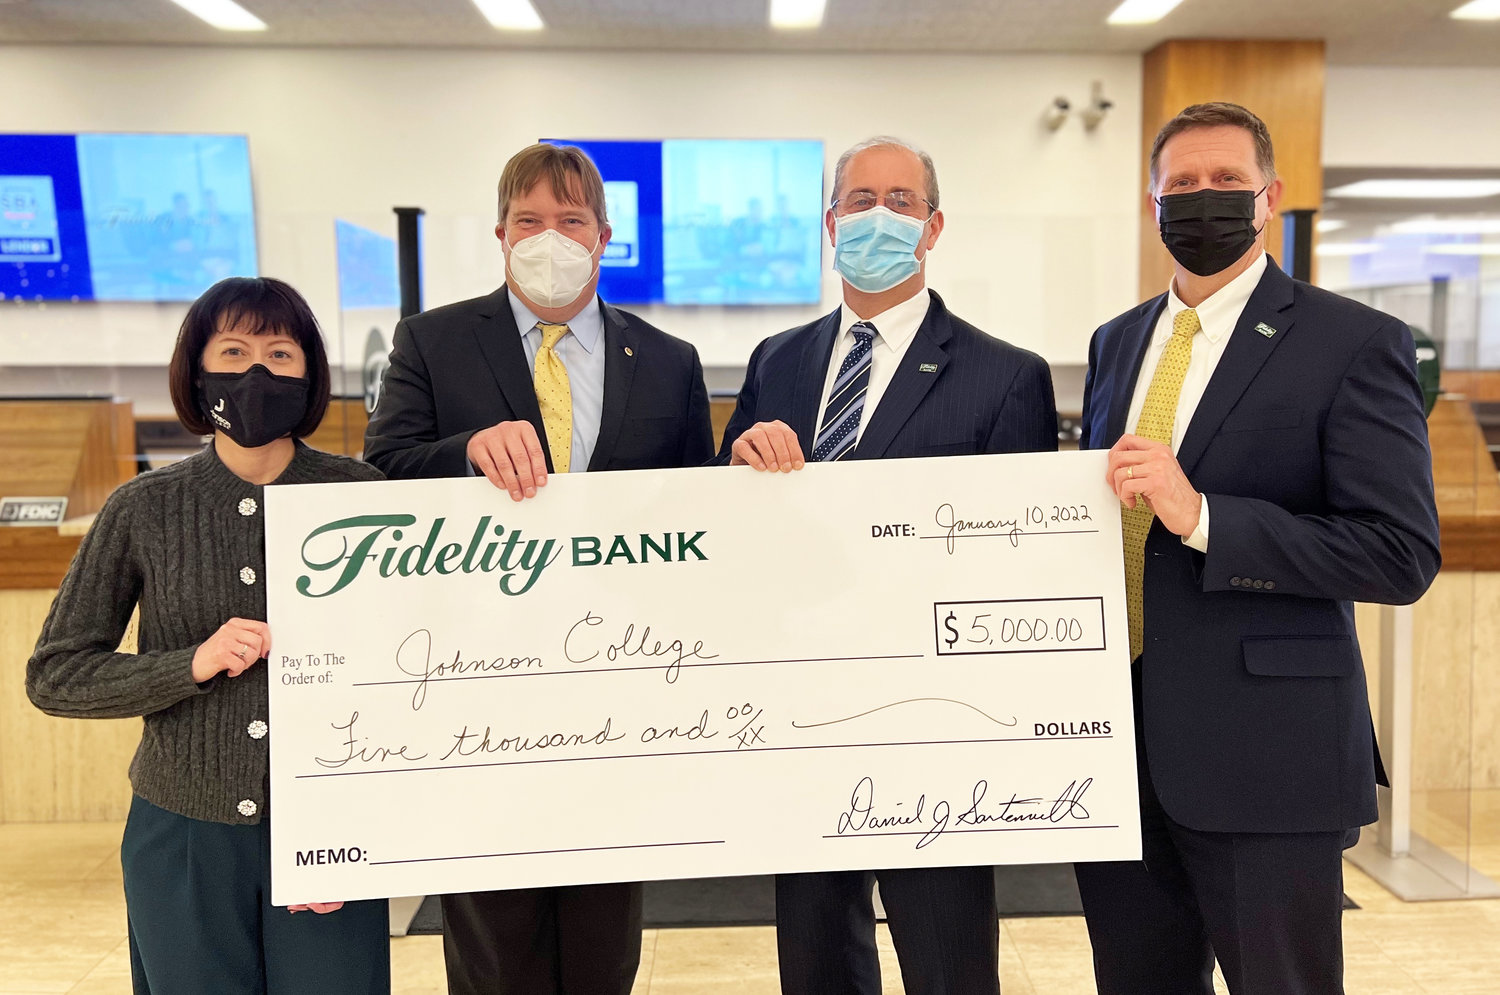 01.19.22 Johnson College Receives $5,000 from Fidelity Bank